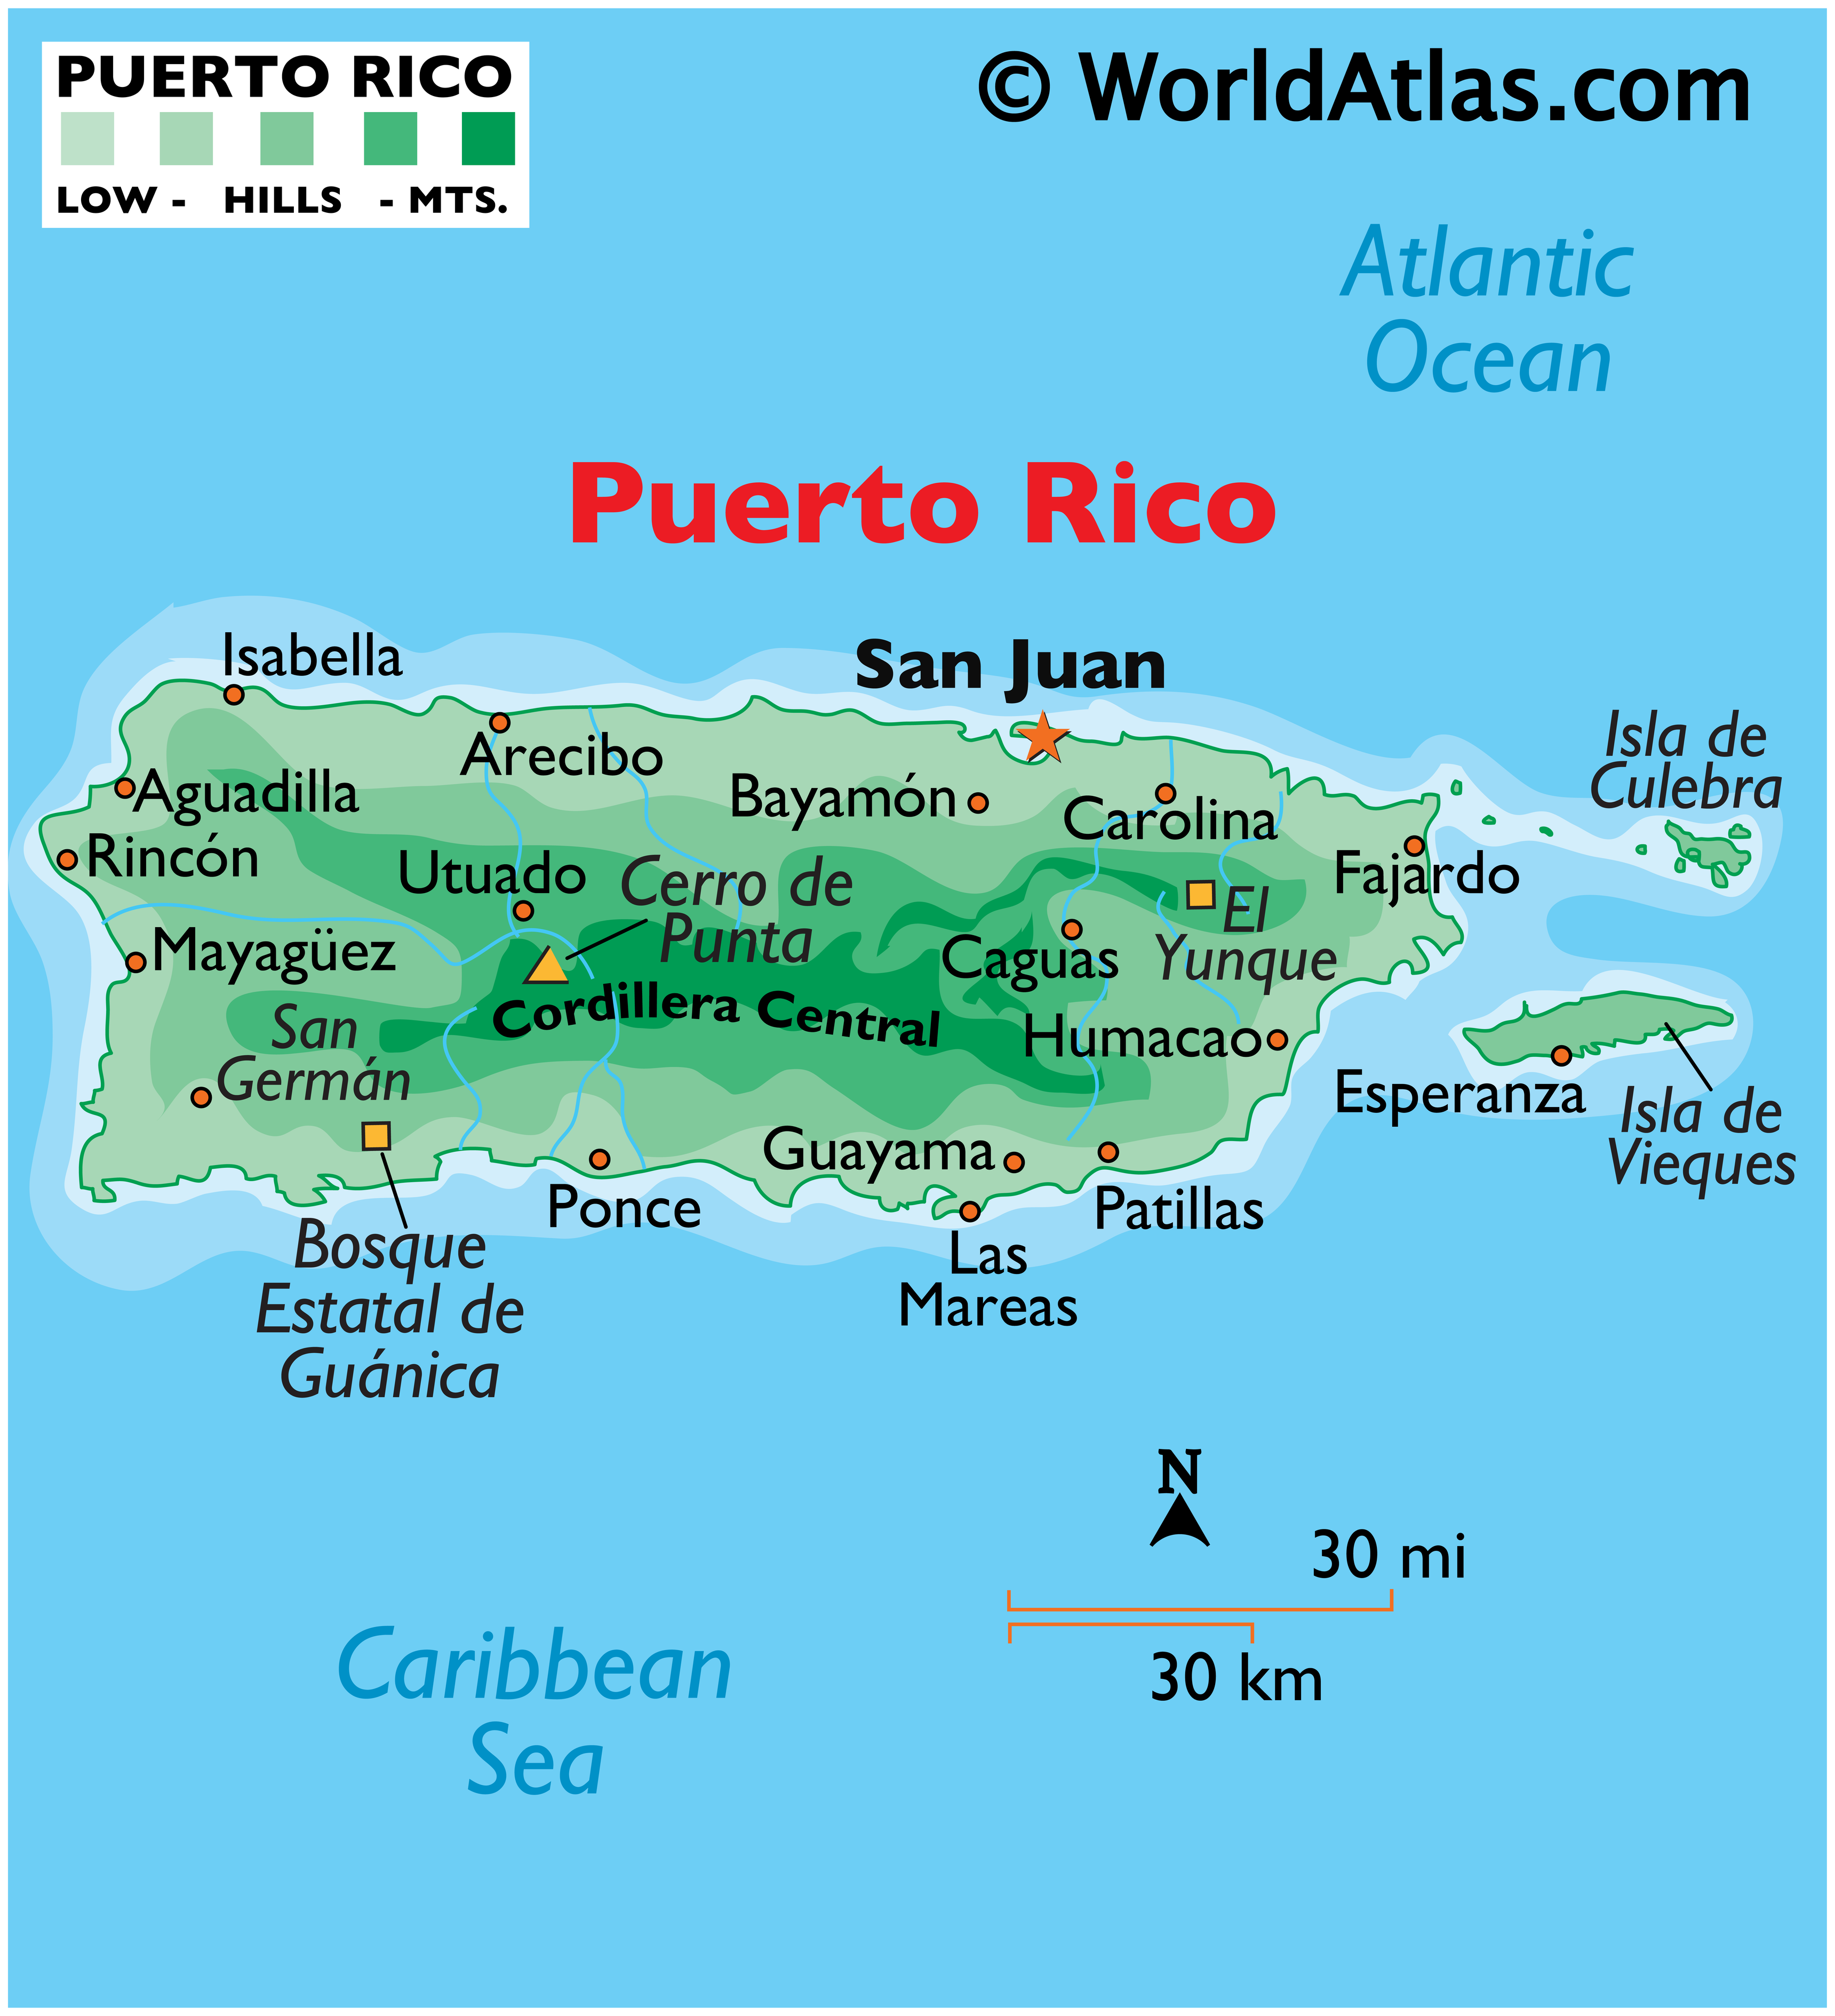 Map Of Puerto Rico And Islands Puerto Rico Maps & Facts - World Atlas